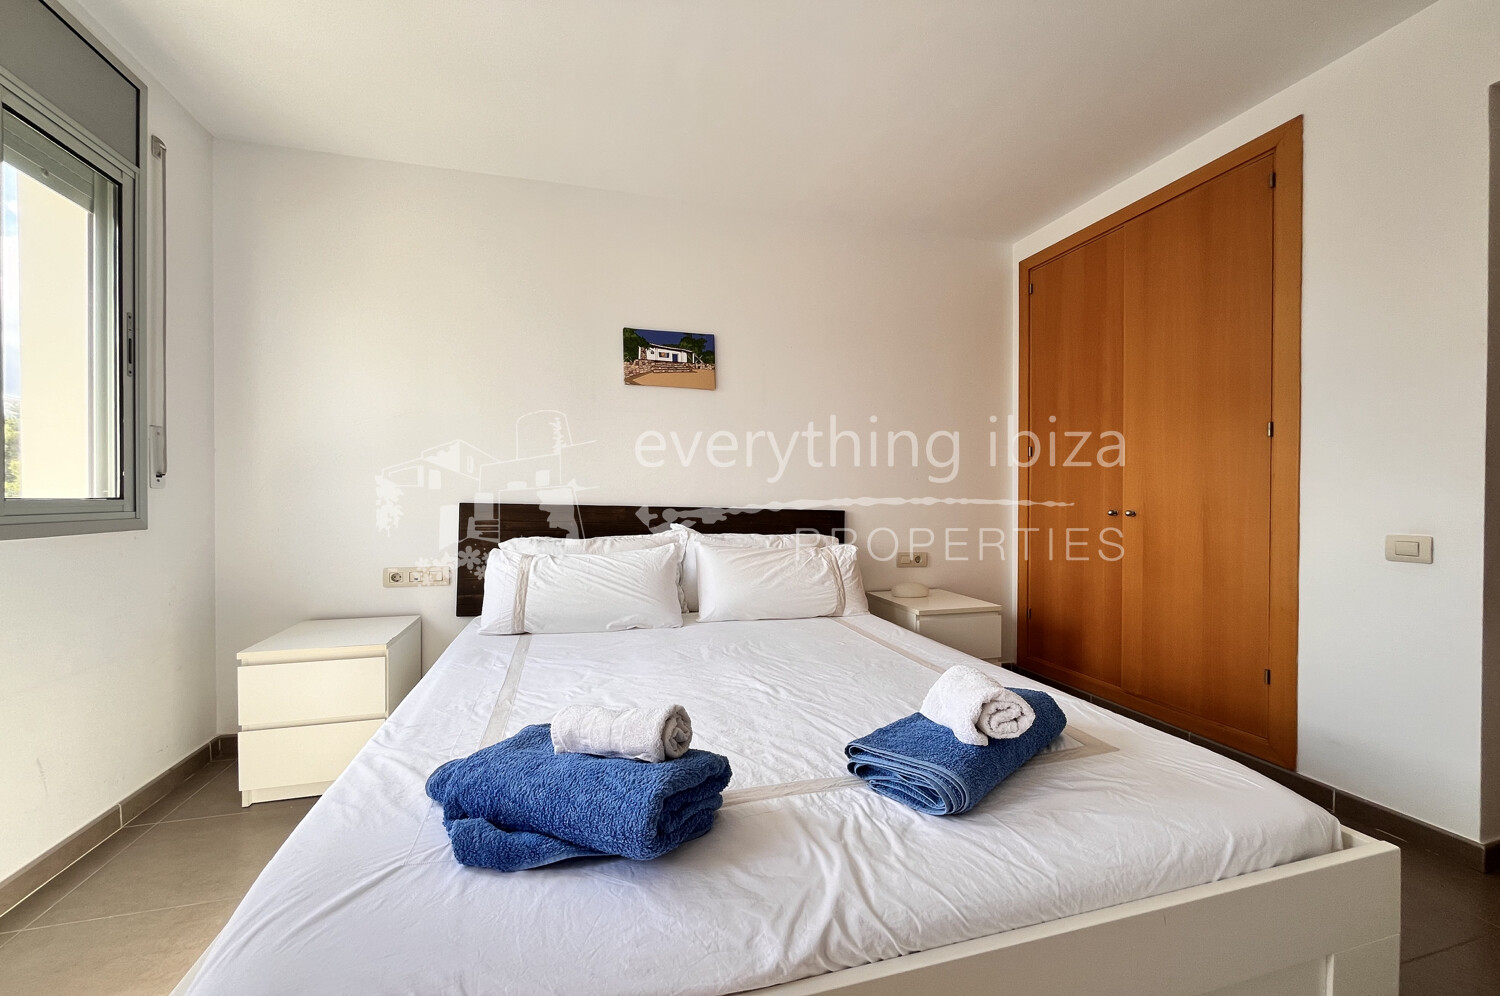 Beachfront Contemporary Apartment Close to the Coastline & Beaches, ref. 1701, for sale in Ibiza by everything ibiza Properties